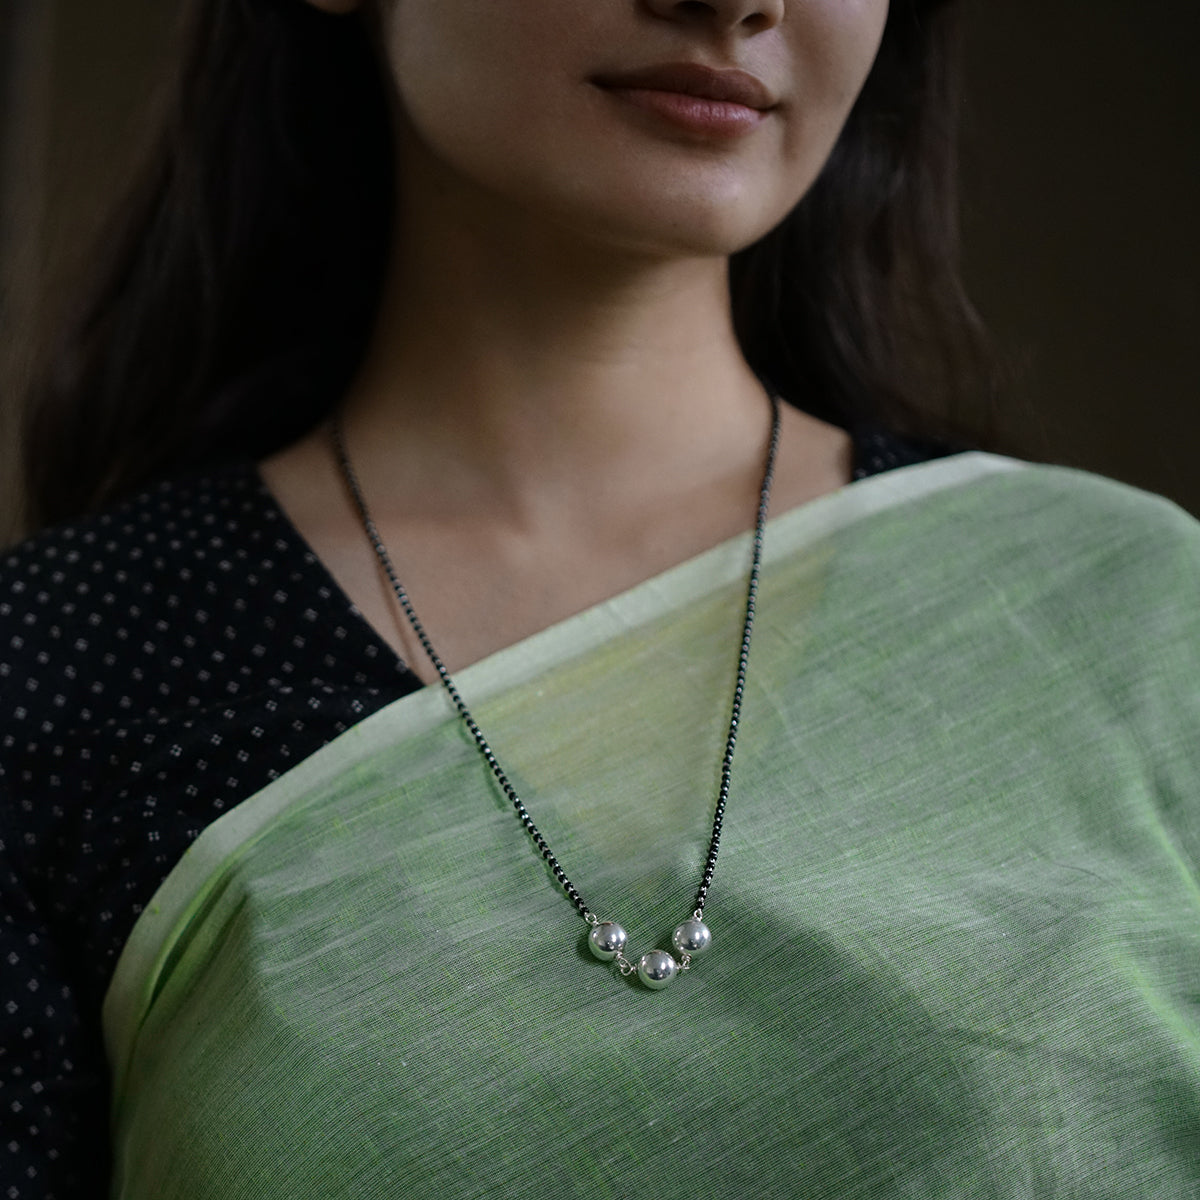 a woman wearing a green shirt and a necklace